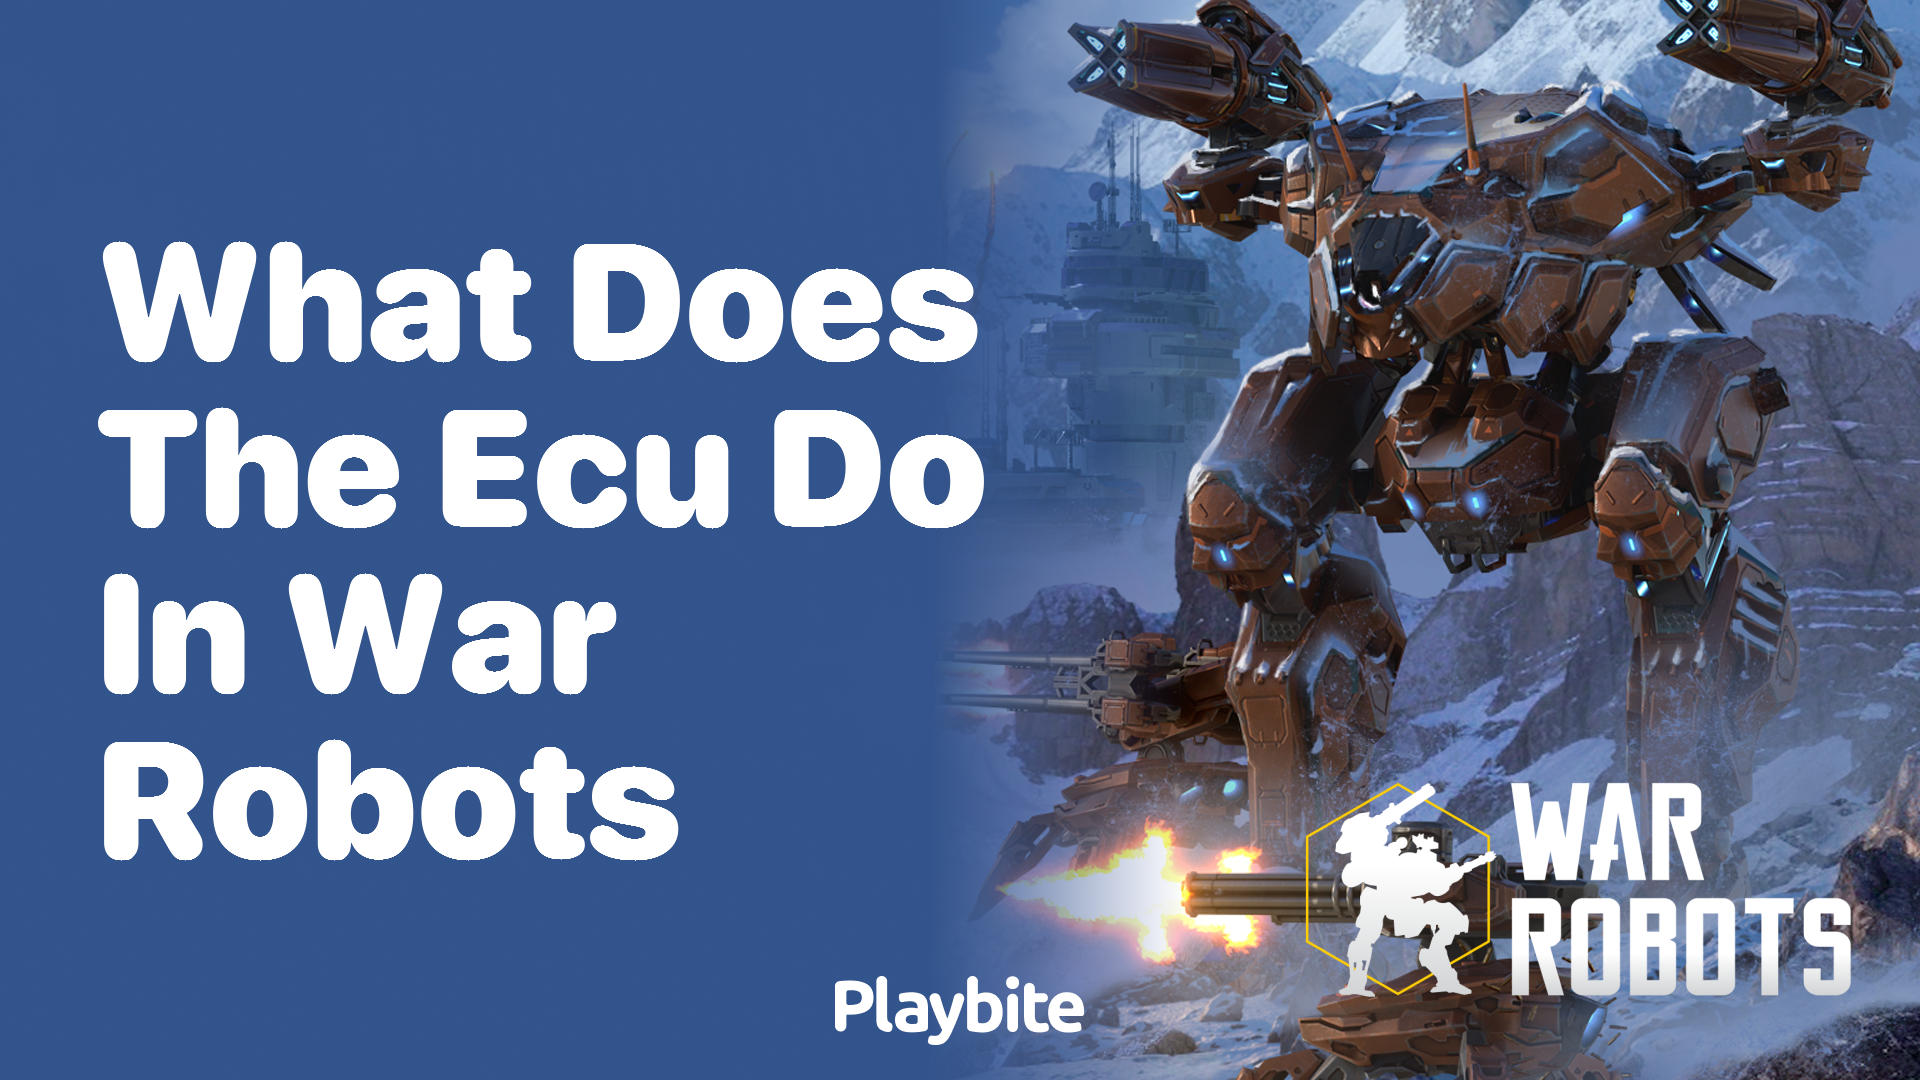 What Does the ECU Do in War Robots?